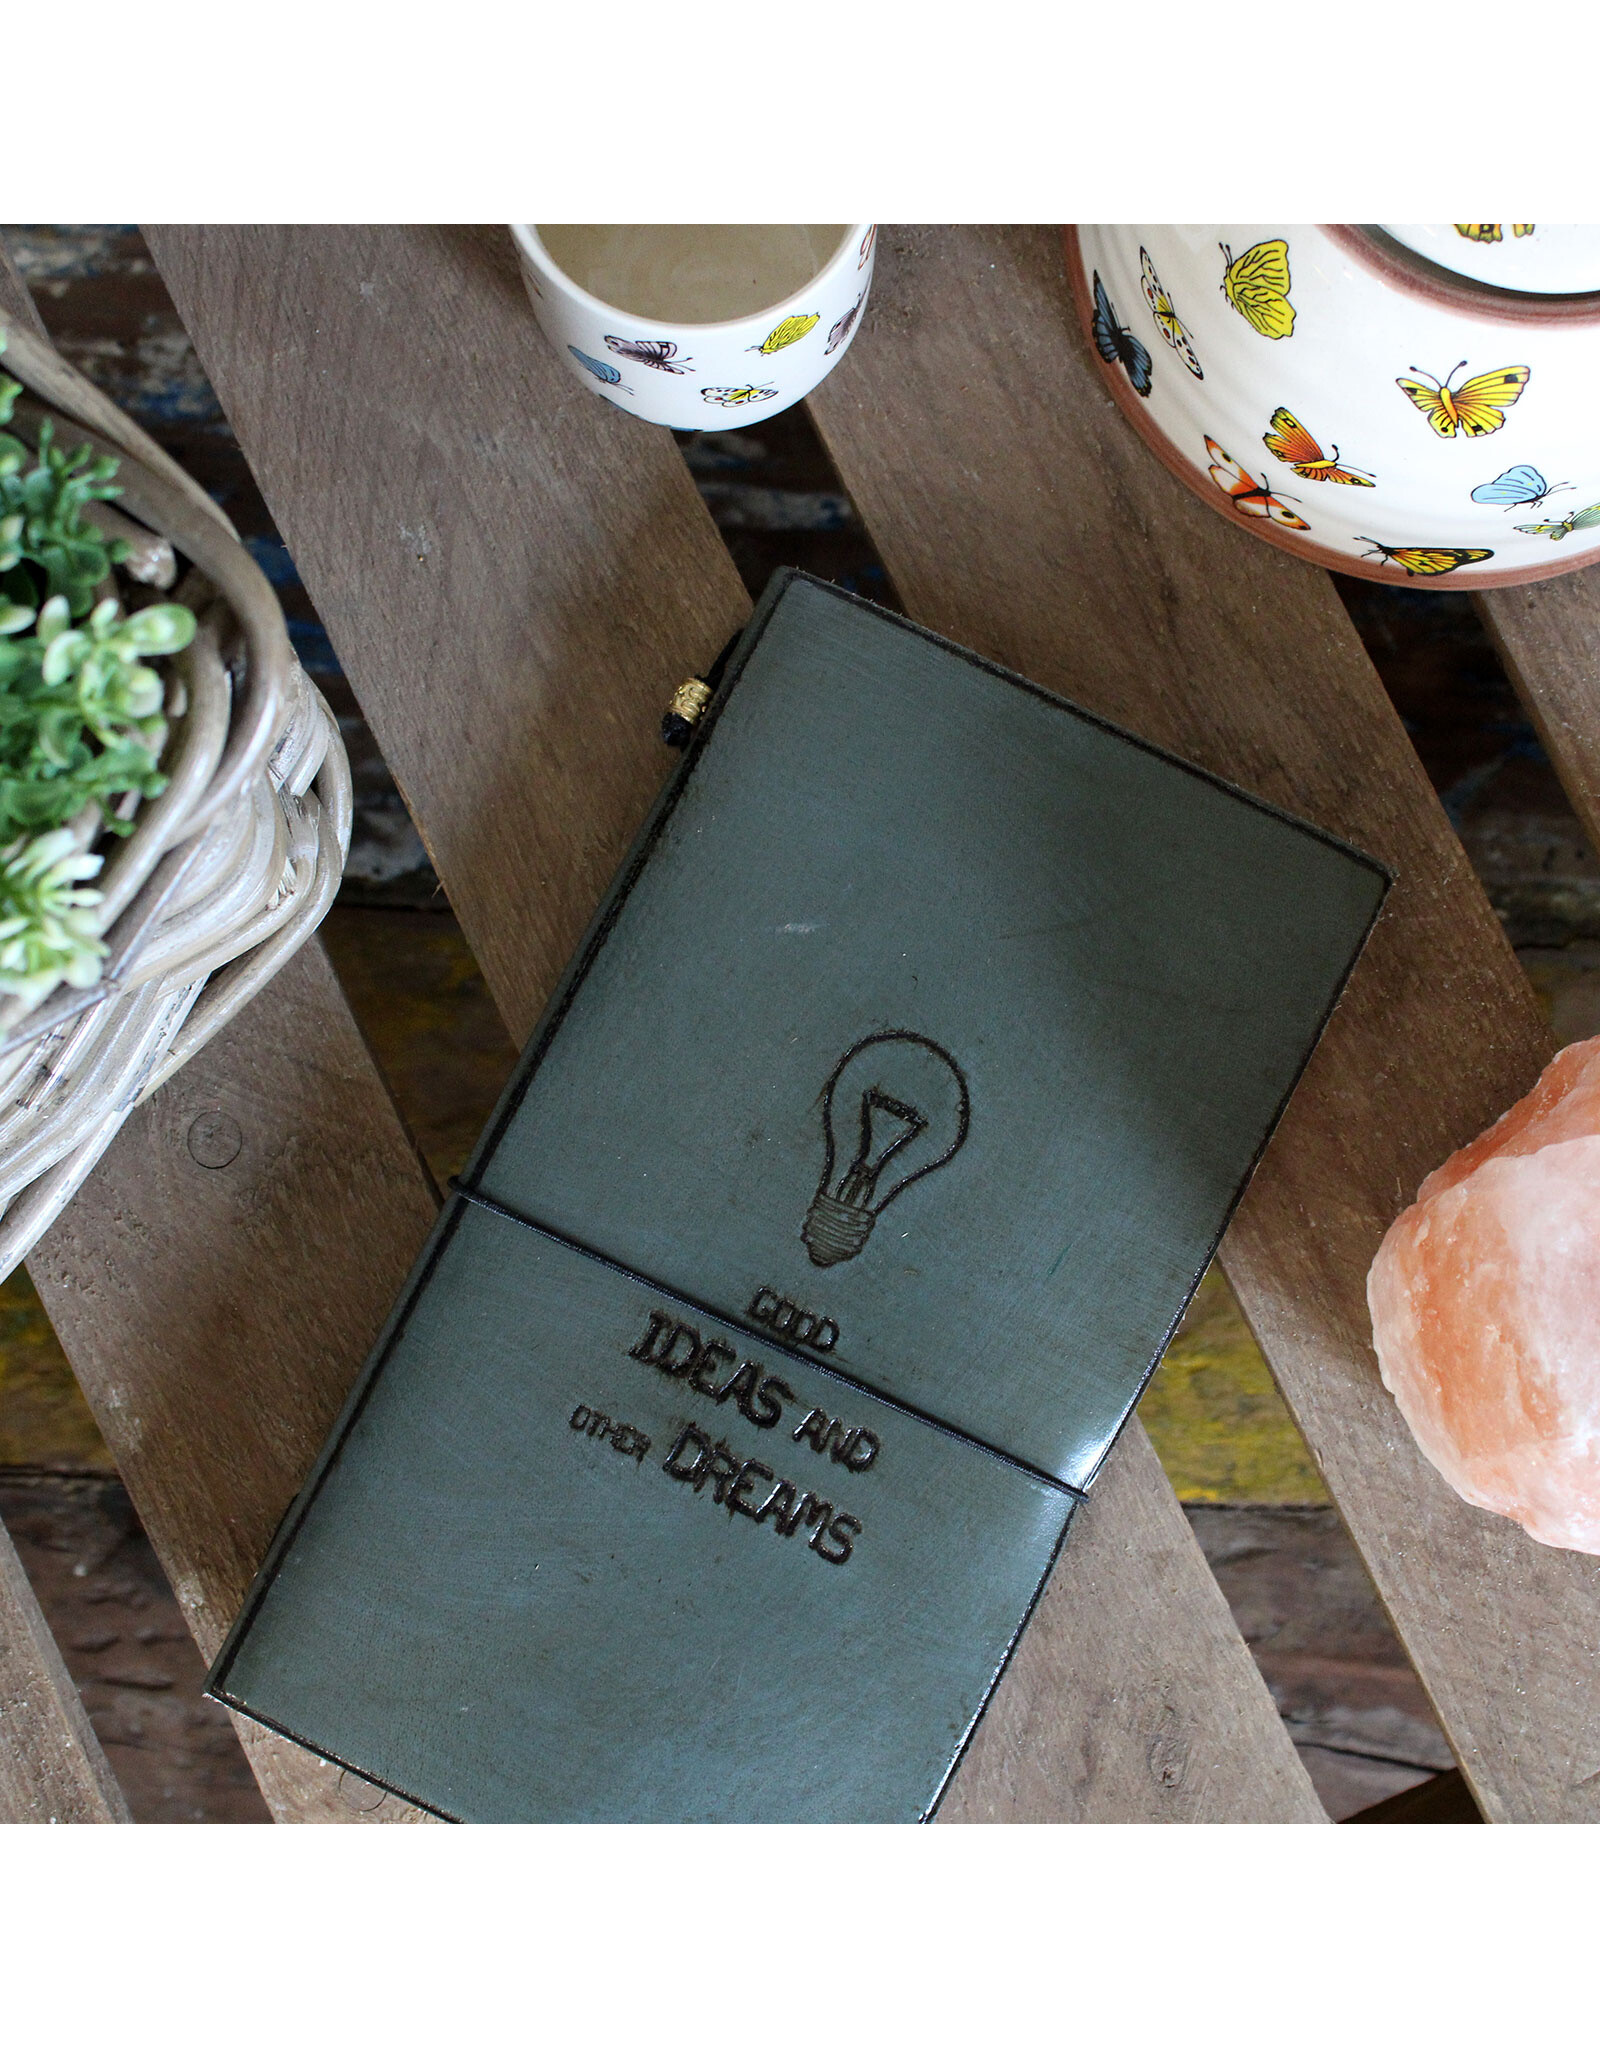 AWG Miscellaneous - Leather Journal 'Good Ideas and Other Dreams'